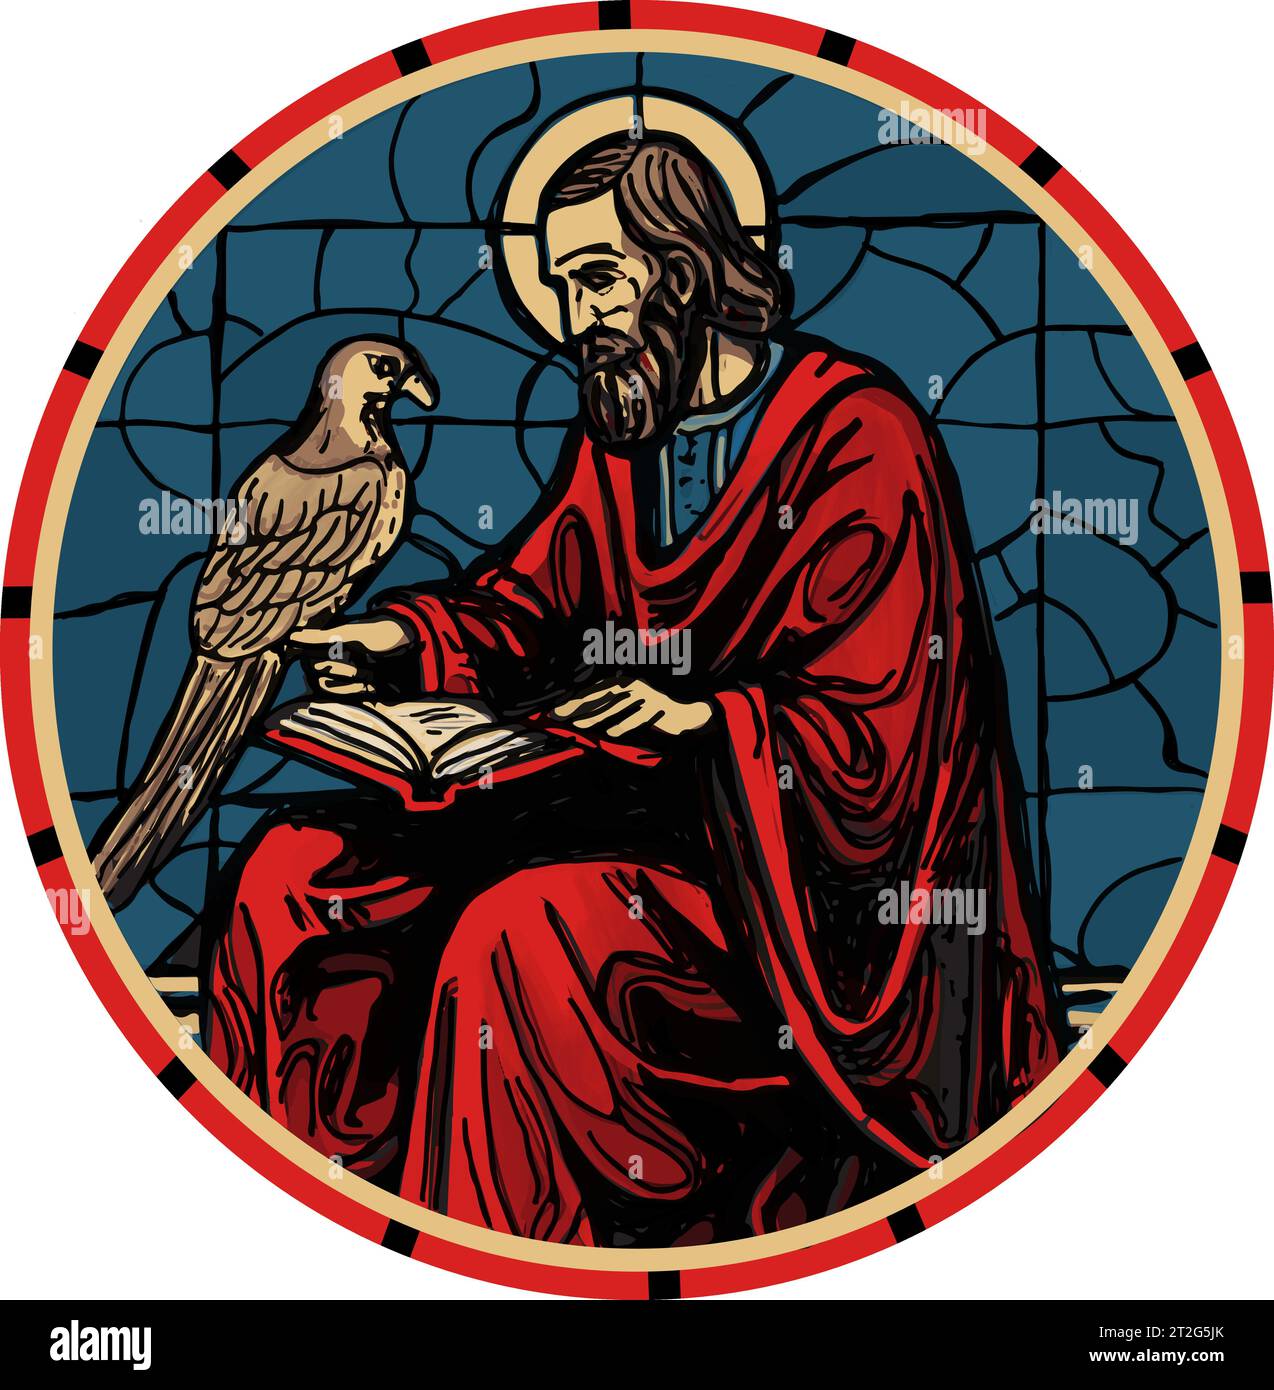 Round stained glass window of a Catholic Saint holding a bird, interpretation of St. Francis of Assisi or St. Gall, blue backgound with red border. Stock Vector